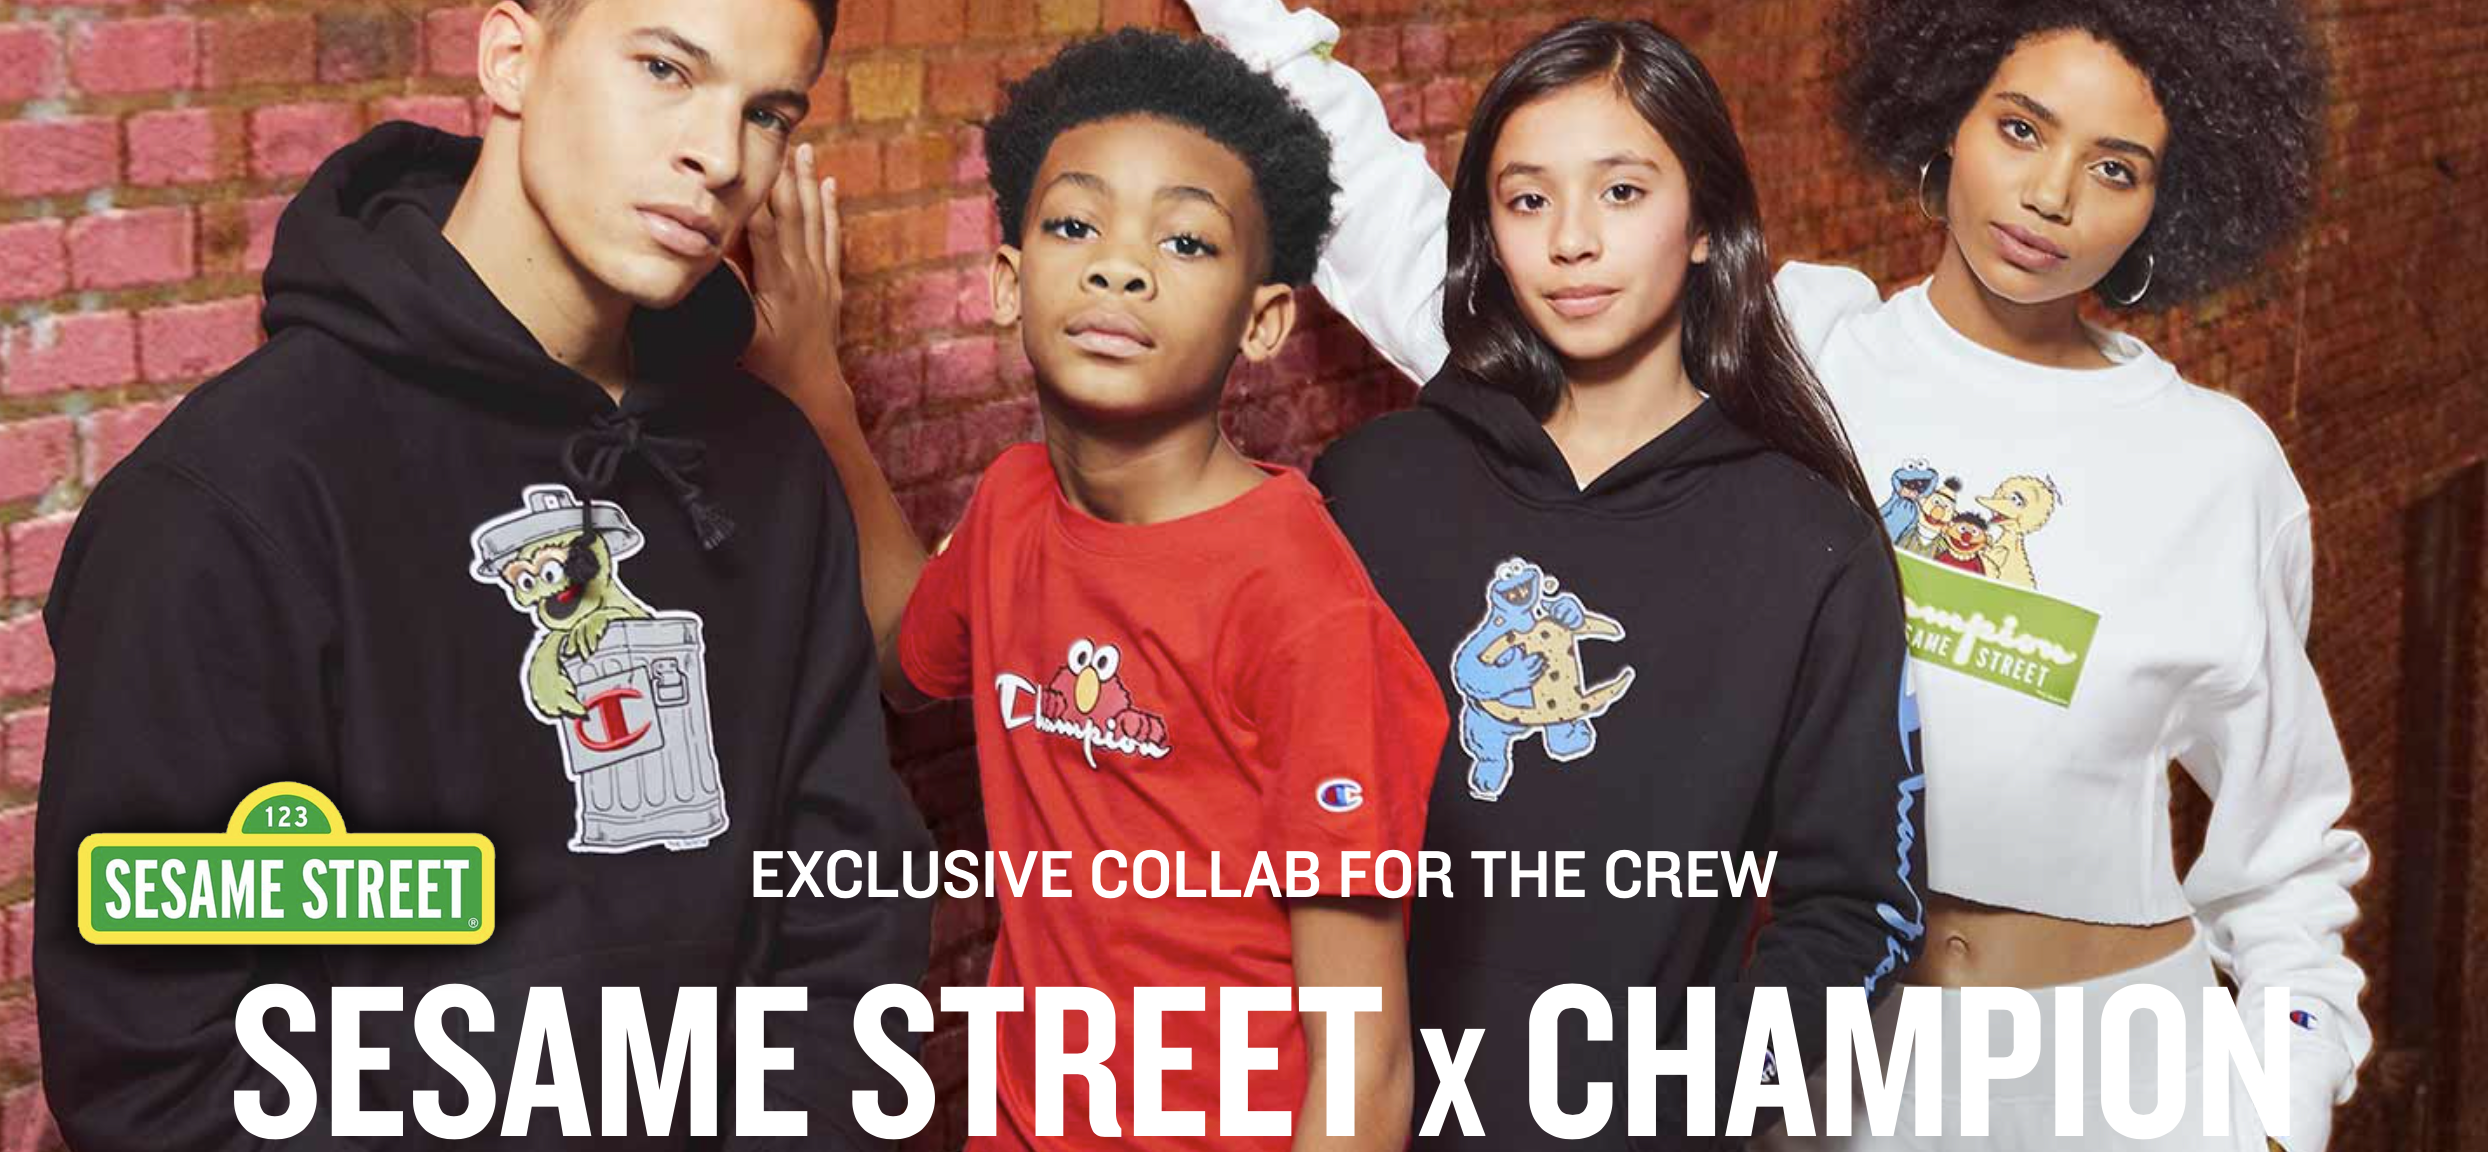 Champion Sesame Street Collection Makes Its Debut Along with Sesame Street Cares COVID-19 Initative